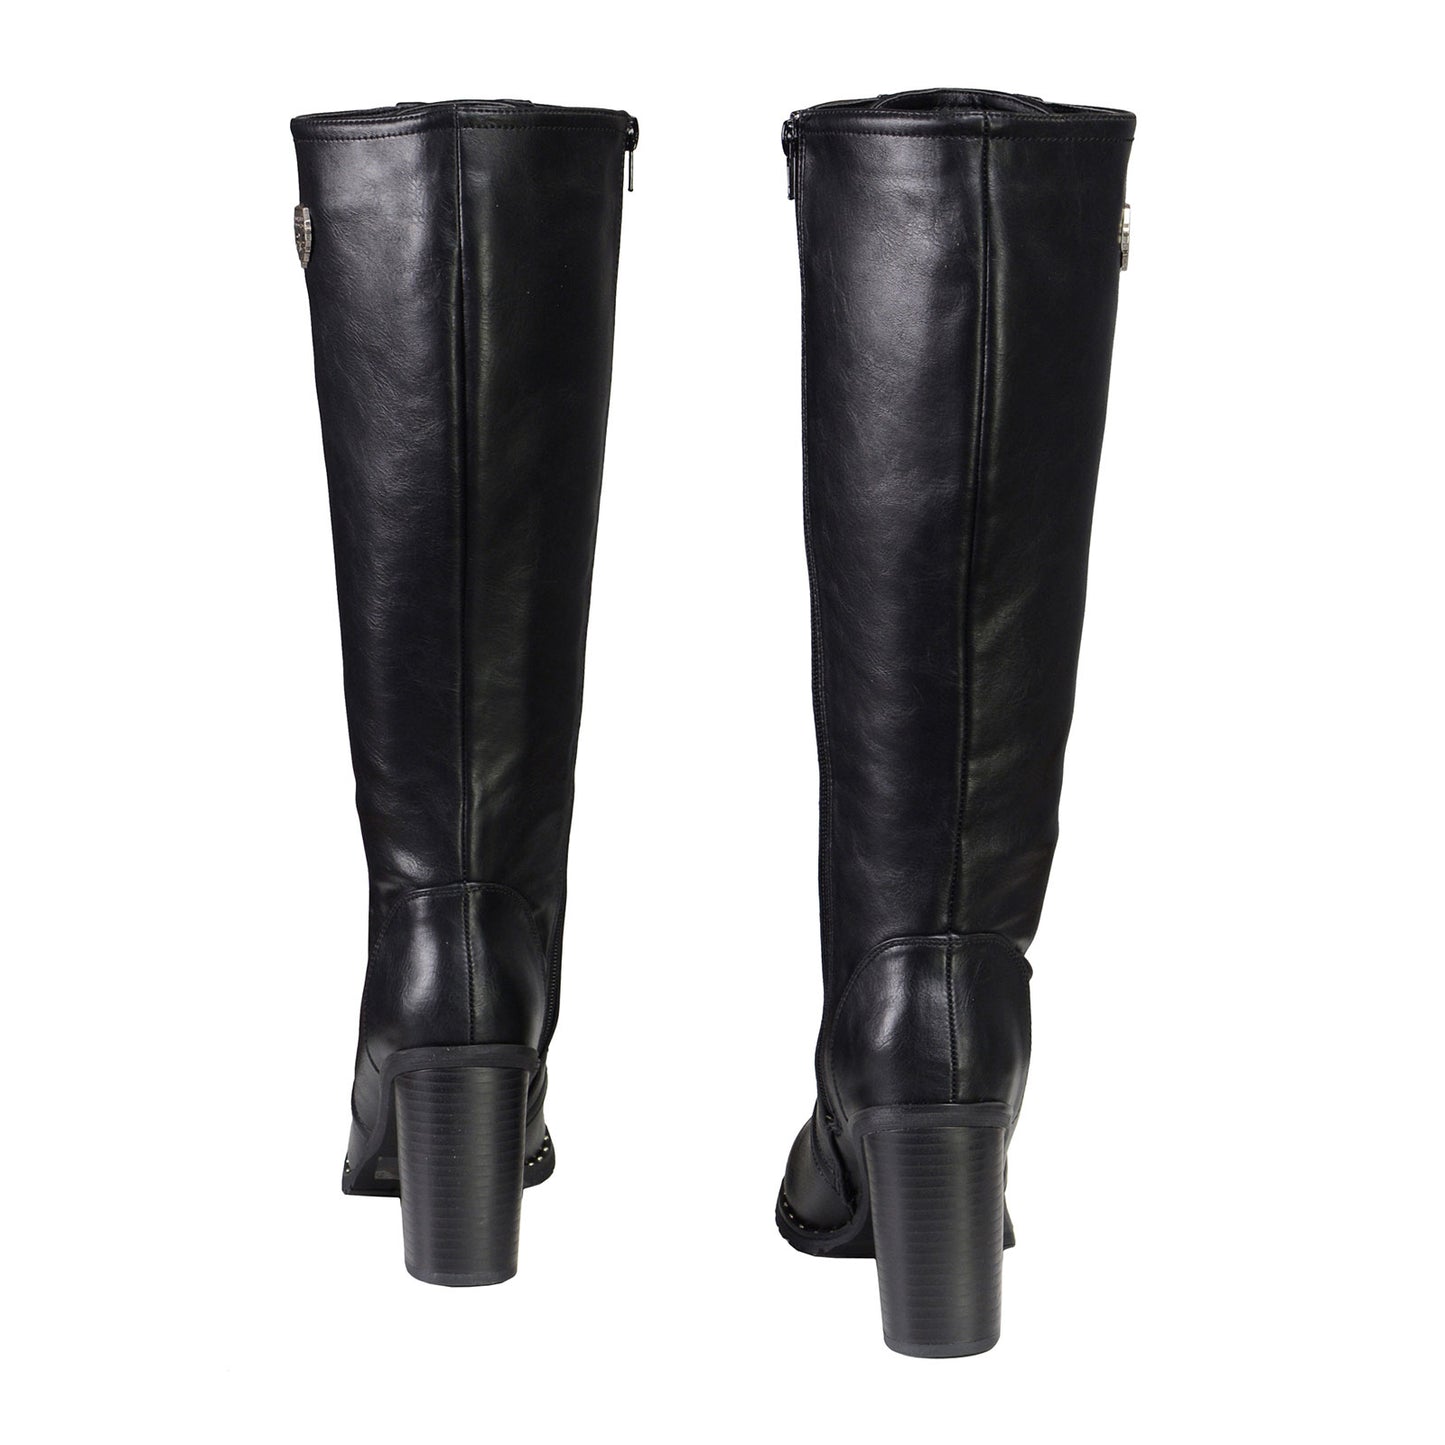 Milwaukee Leather X9442 Women's Black Lace-Up Tall Fashion Biker Boots with High Heel & Studs